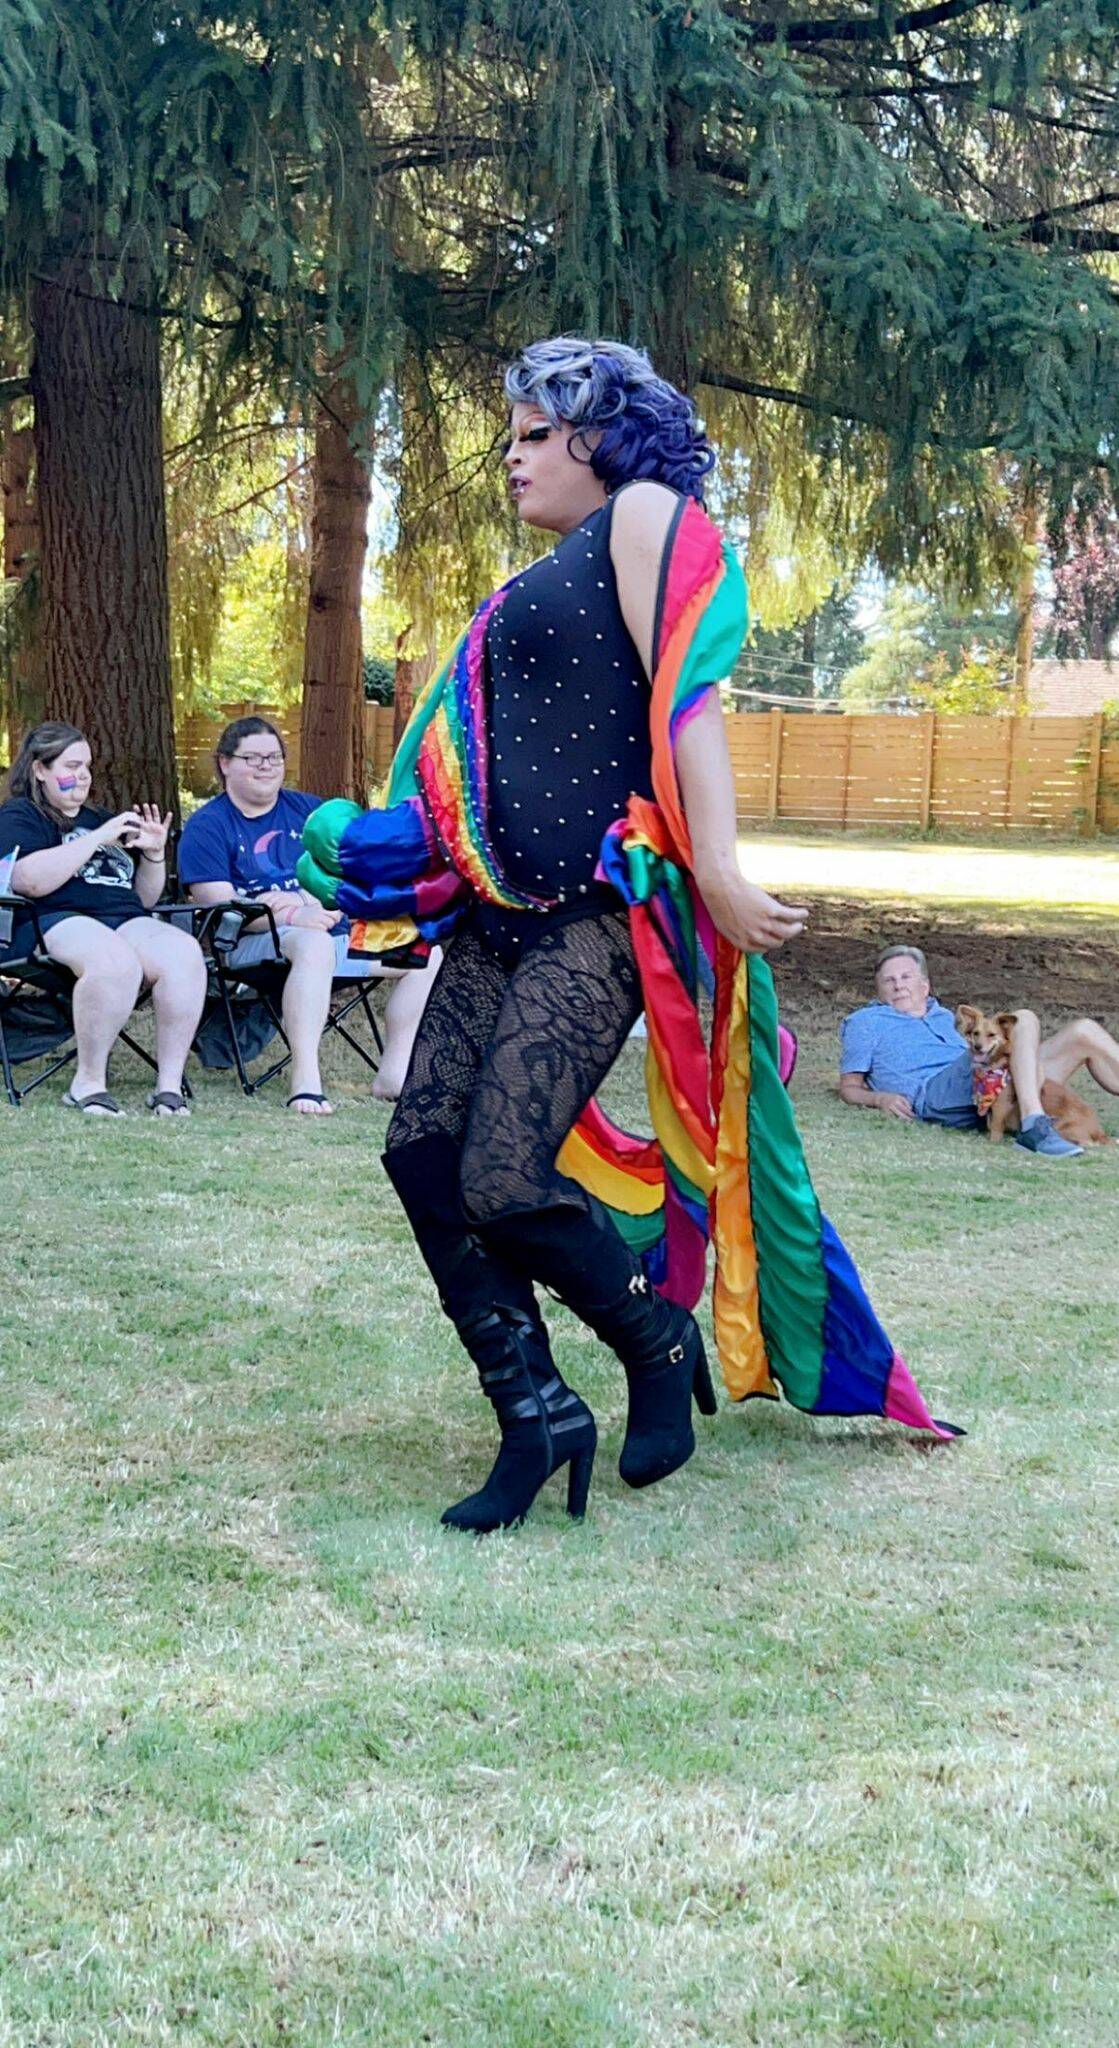 Picture courtesy of Allison Fine
Drag queen at Wayside UCC Pride Picnic August 6.